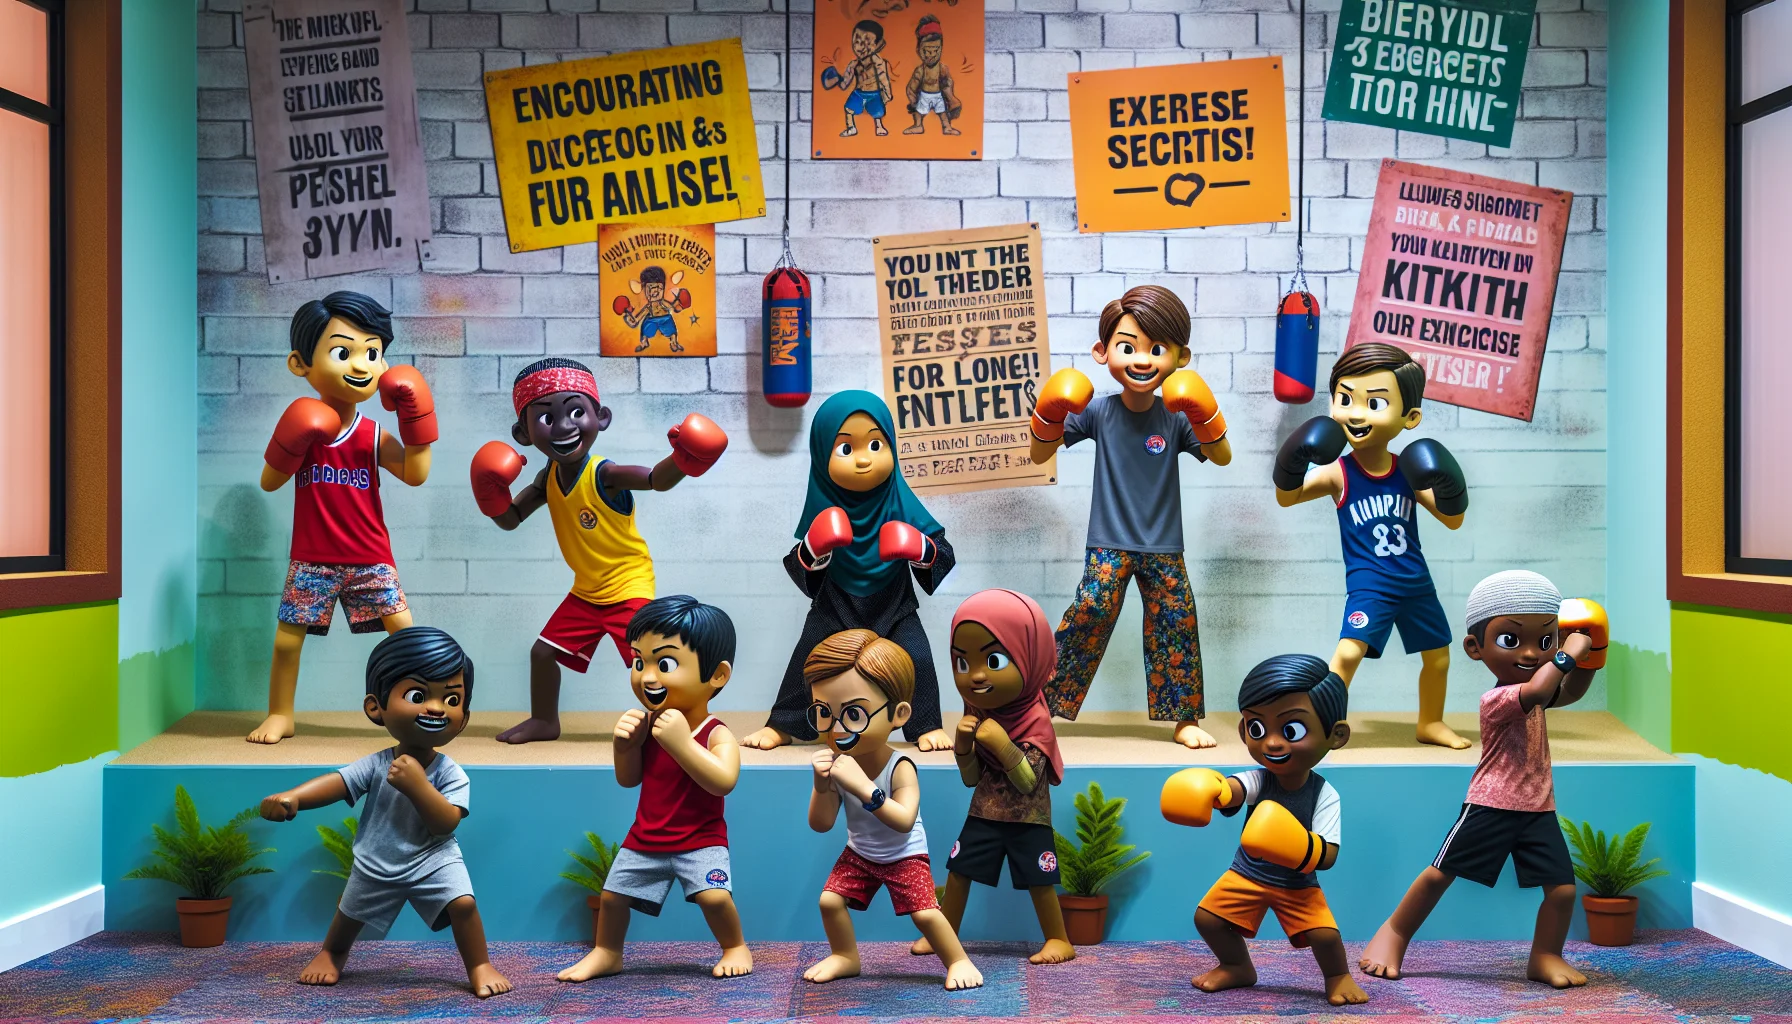 Envision a humorous and enticing scenario that showcases a group of children from different descents: Caucasian, Hispanic, Black, Middle-Eastern, and South Asian engaging in a kickboxing training. The scene takes place at a brightly colored local gym adorned with encouraging quotes about fitness and exercise on the walls. Each child displays a unique, exaggerated kickboxing pose, adding a touch of comedy to the scene. Their expressions are filled with joy and determination, promoting the idea that exercise can be fun and beneficial for all.